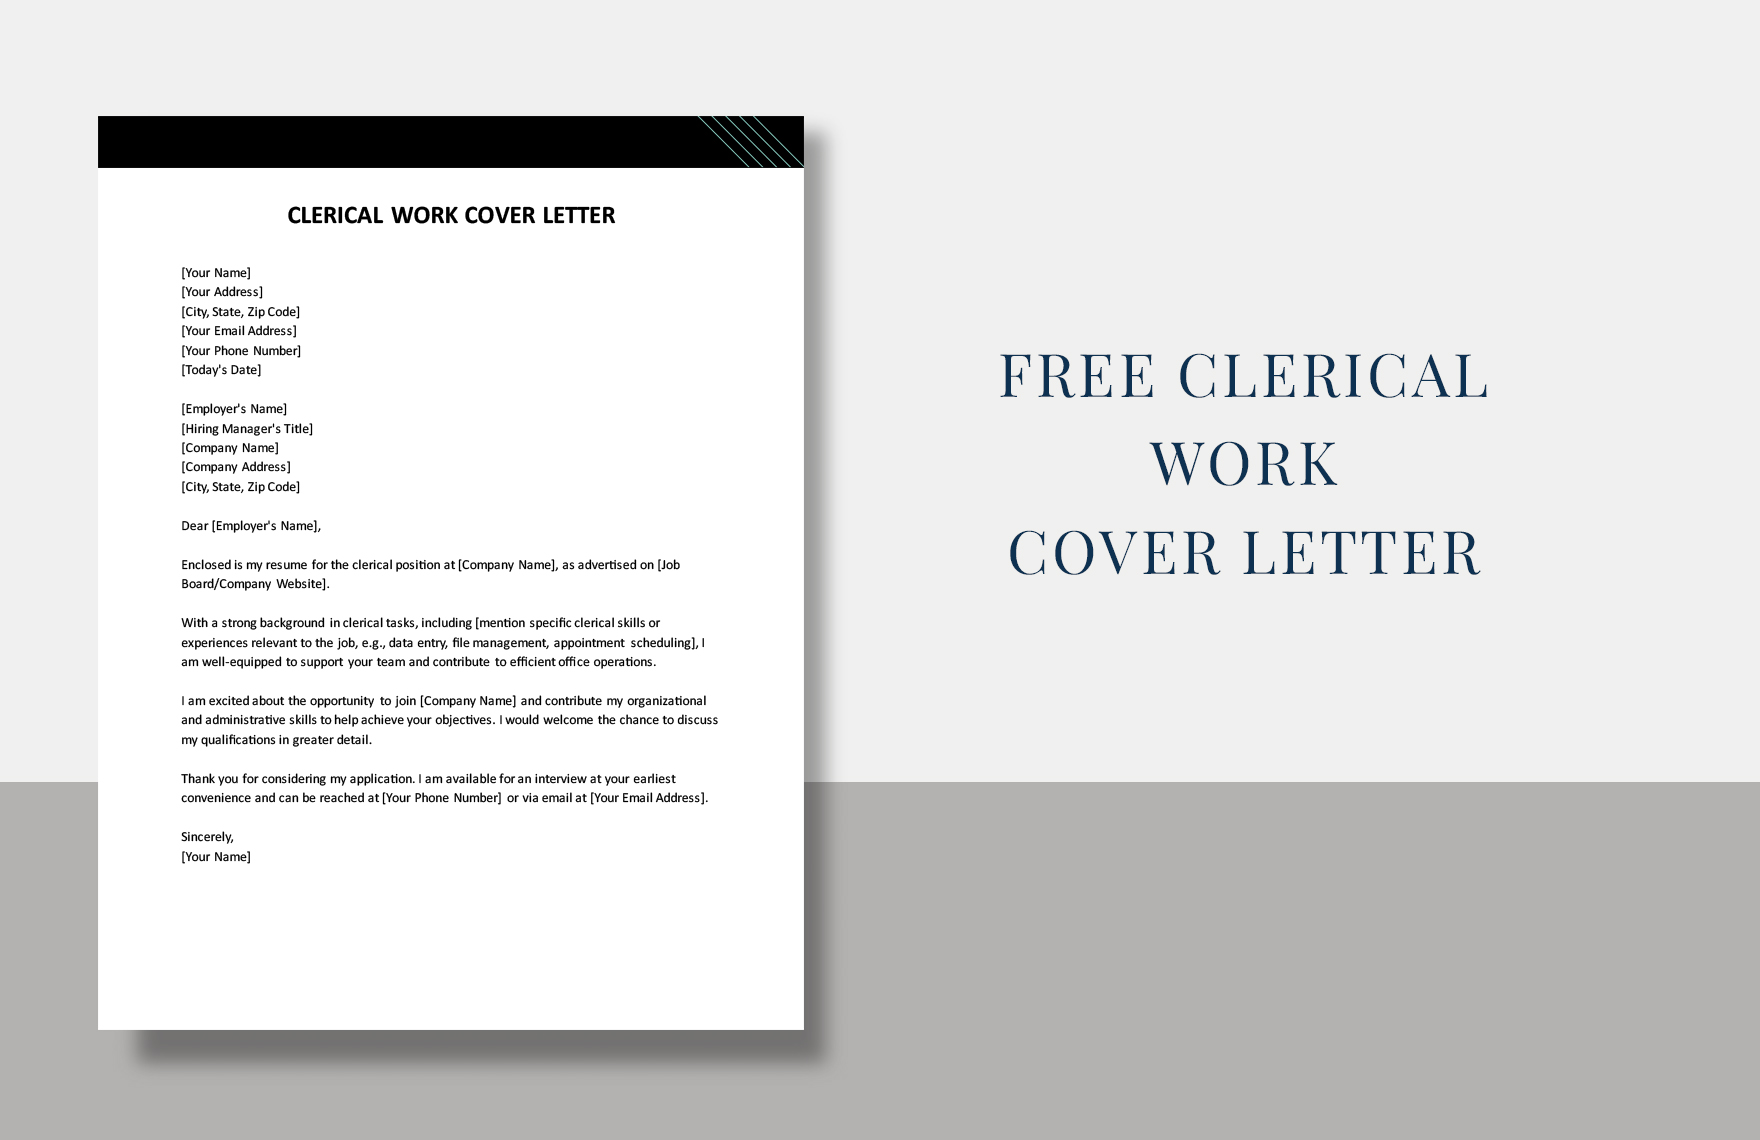 Clerical Work Cover Letter in Word, Google Docs, PDF